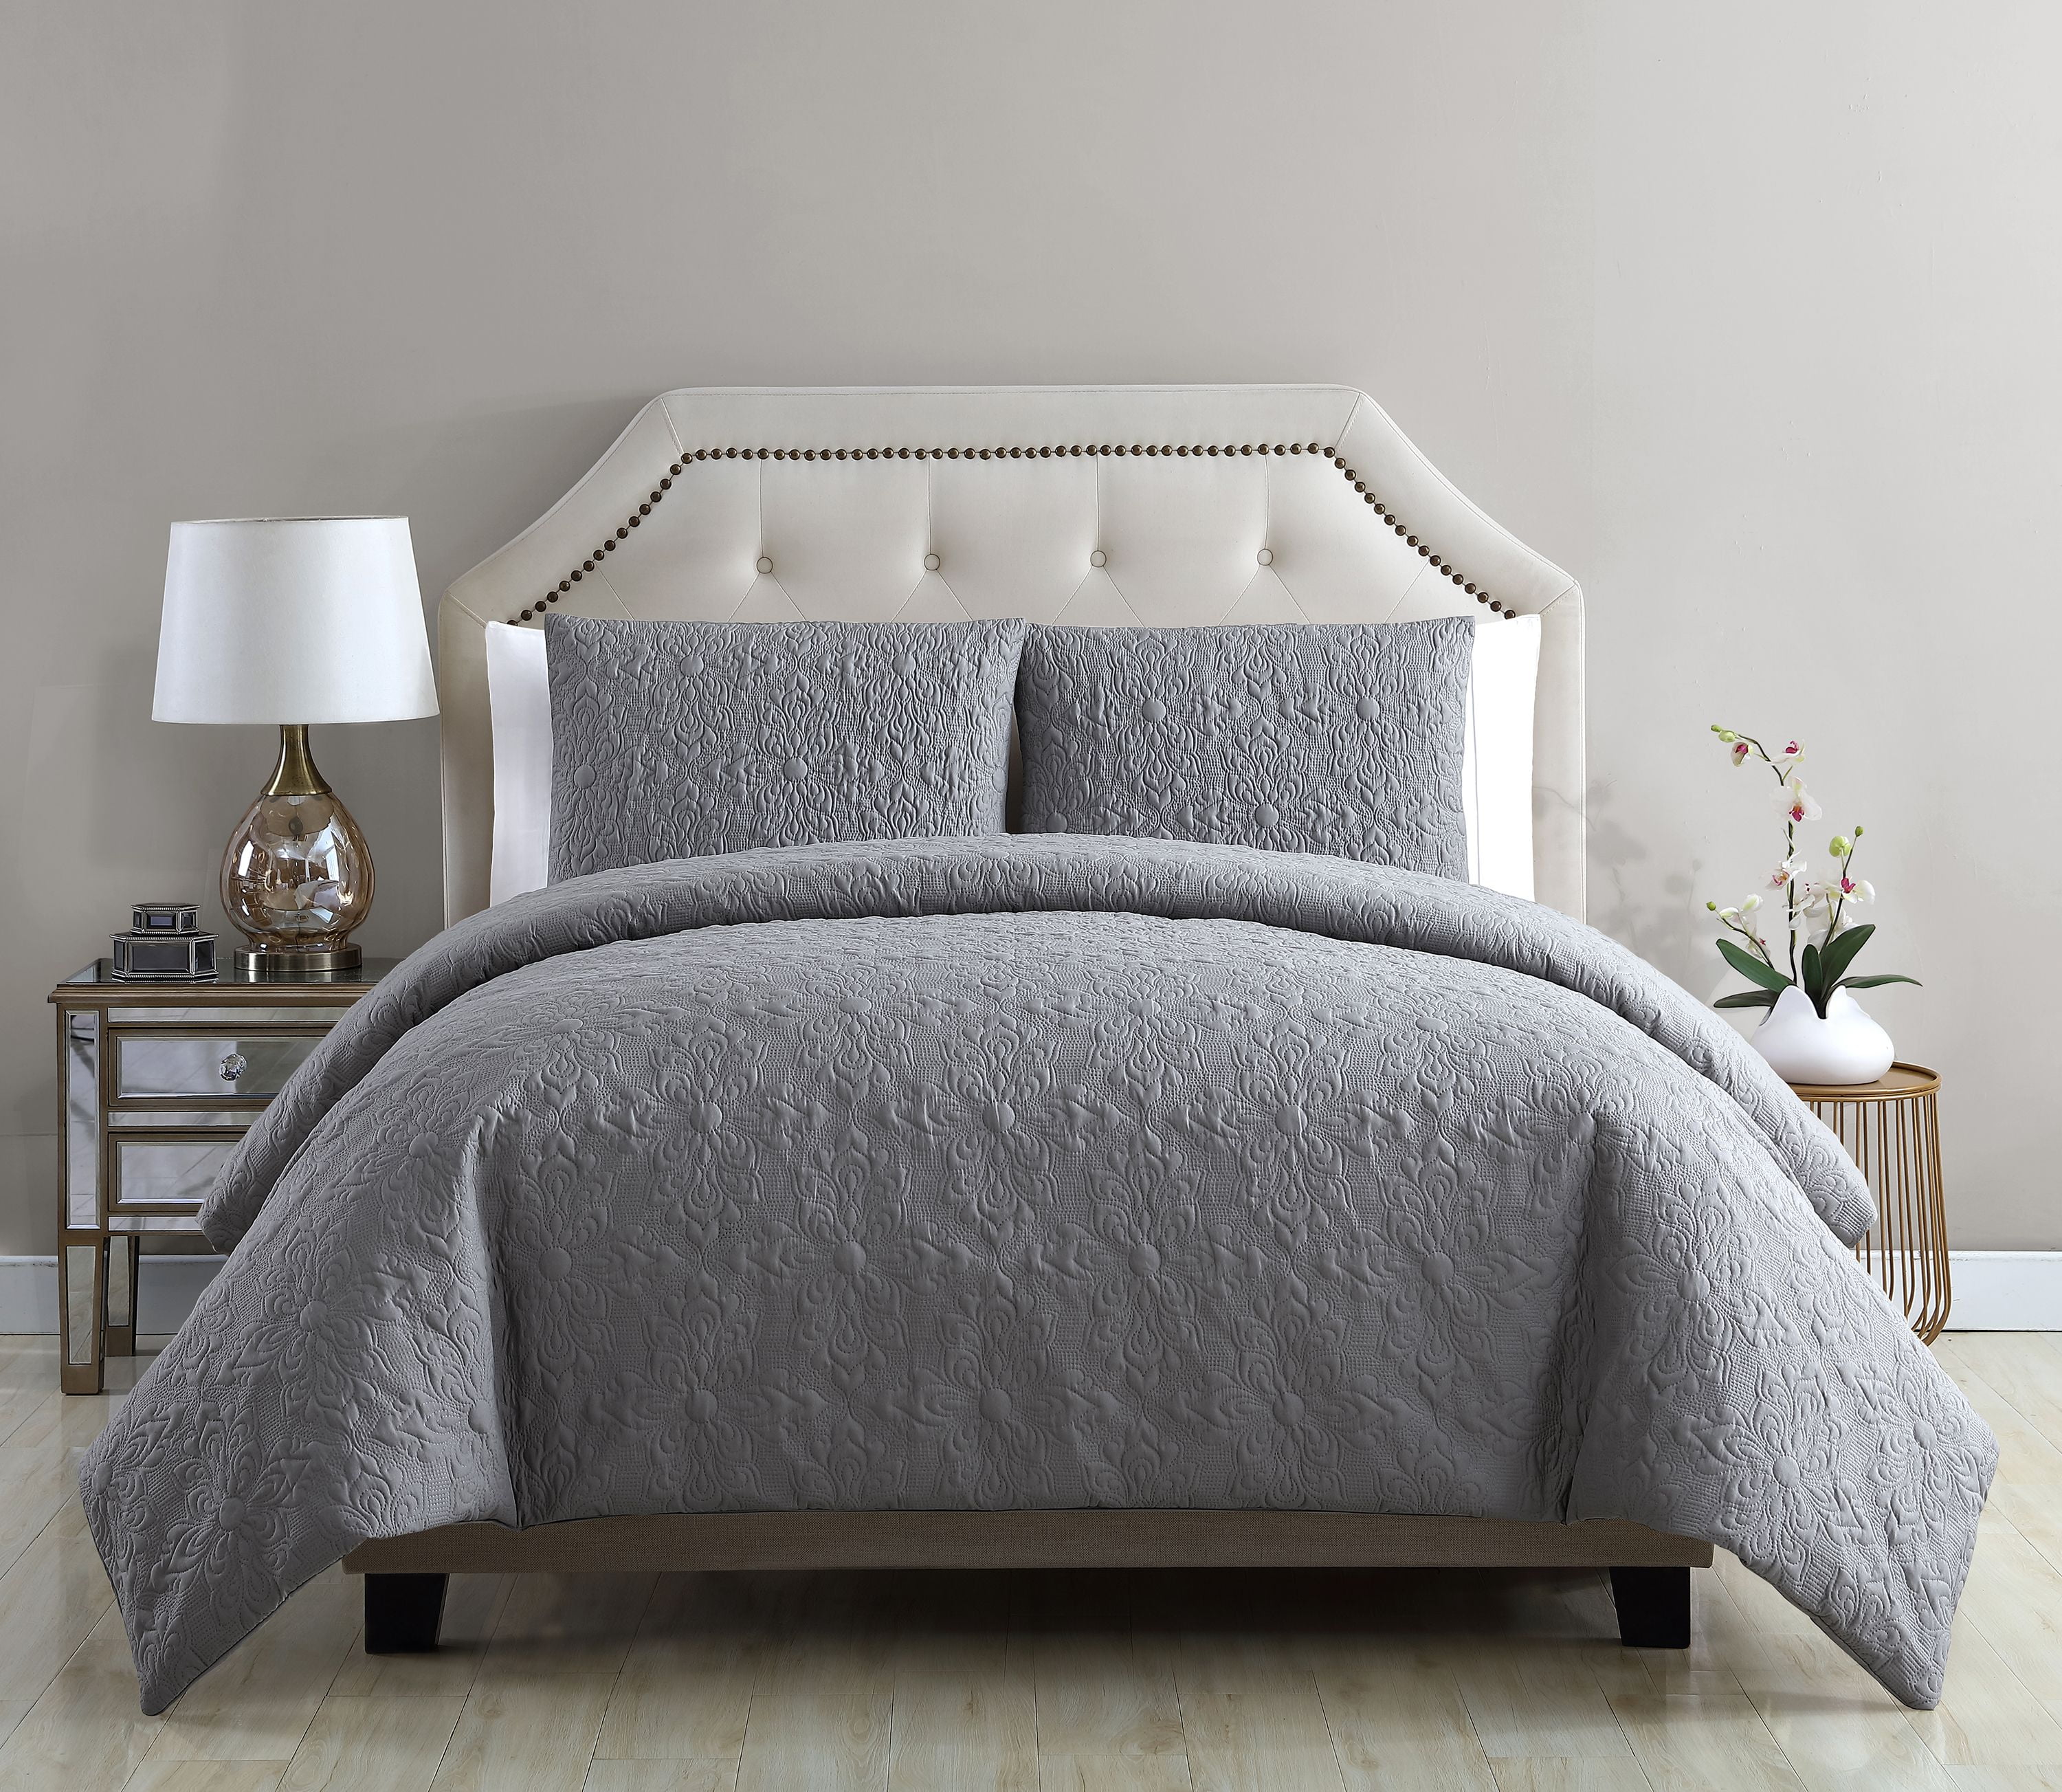 VCNY Home Caroline Embossed Solid Floral Duvet Cover Set, Queen, Gray ...